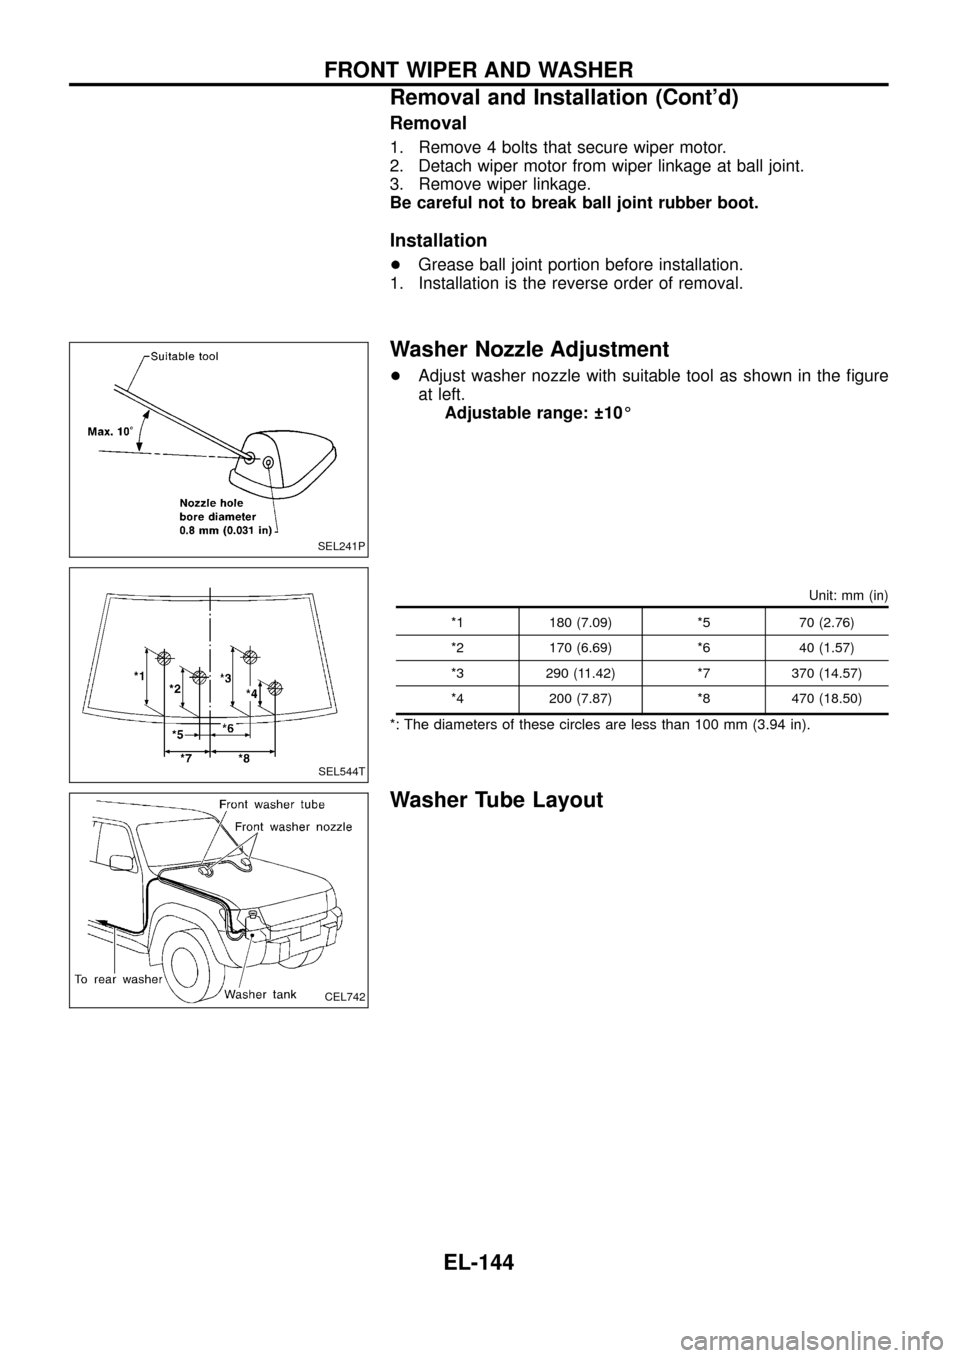 NISSAN PATROL 1998 Y61 / 5.G Electrical System Workshop Manual Removal
1. Remove 4 bolts that secure wiper motor.
2. Detach wiper motor from wiper linkage at ball joint.
3. Remove wiper linkage.
Be careful not to break ball joint rubber boot.
Installation
+Grease